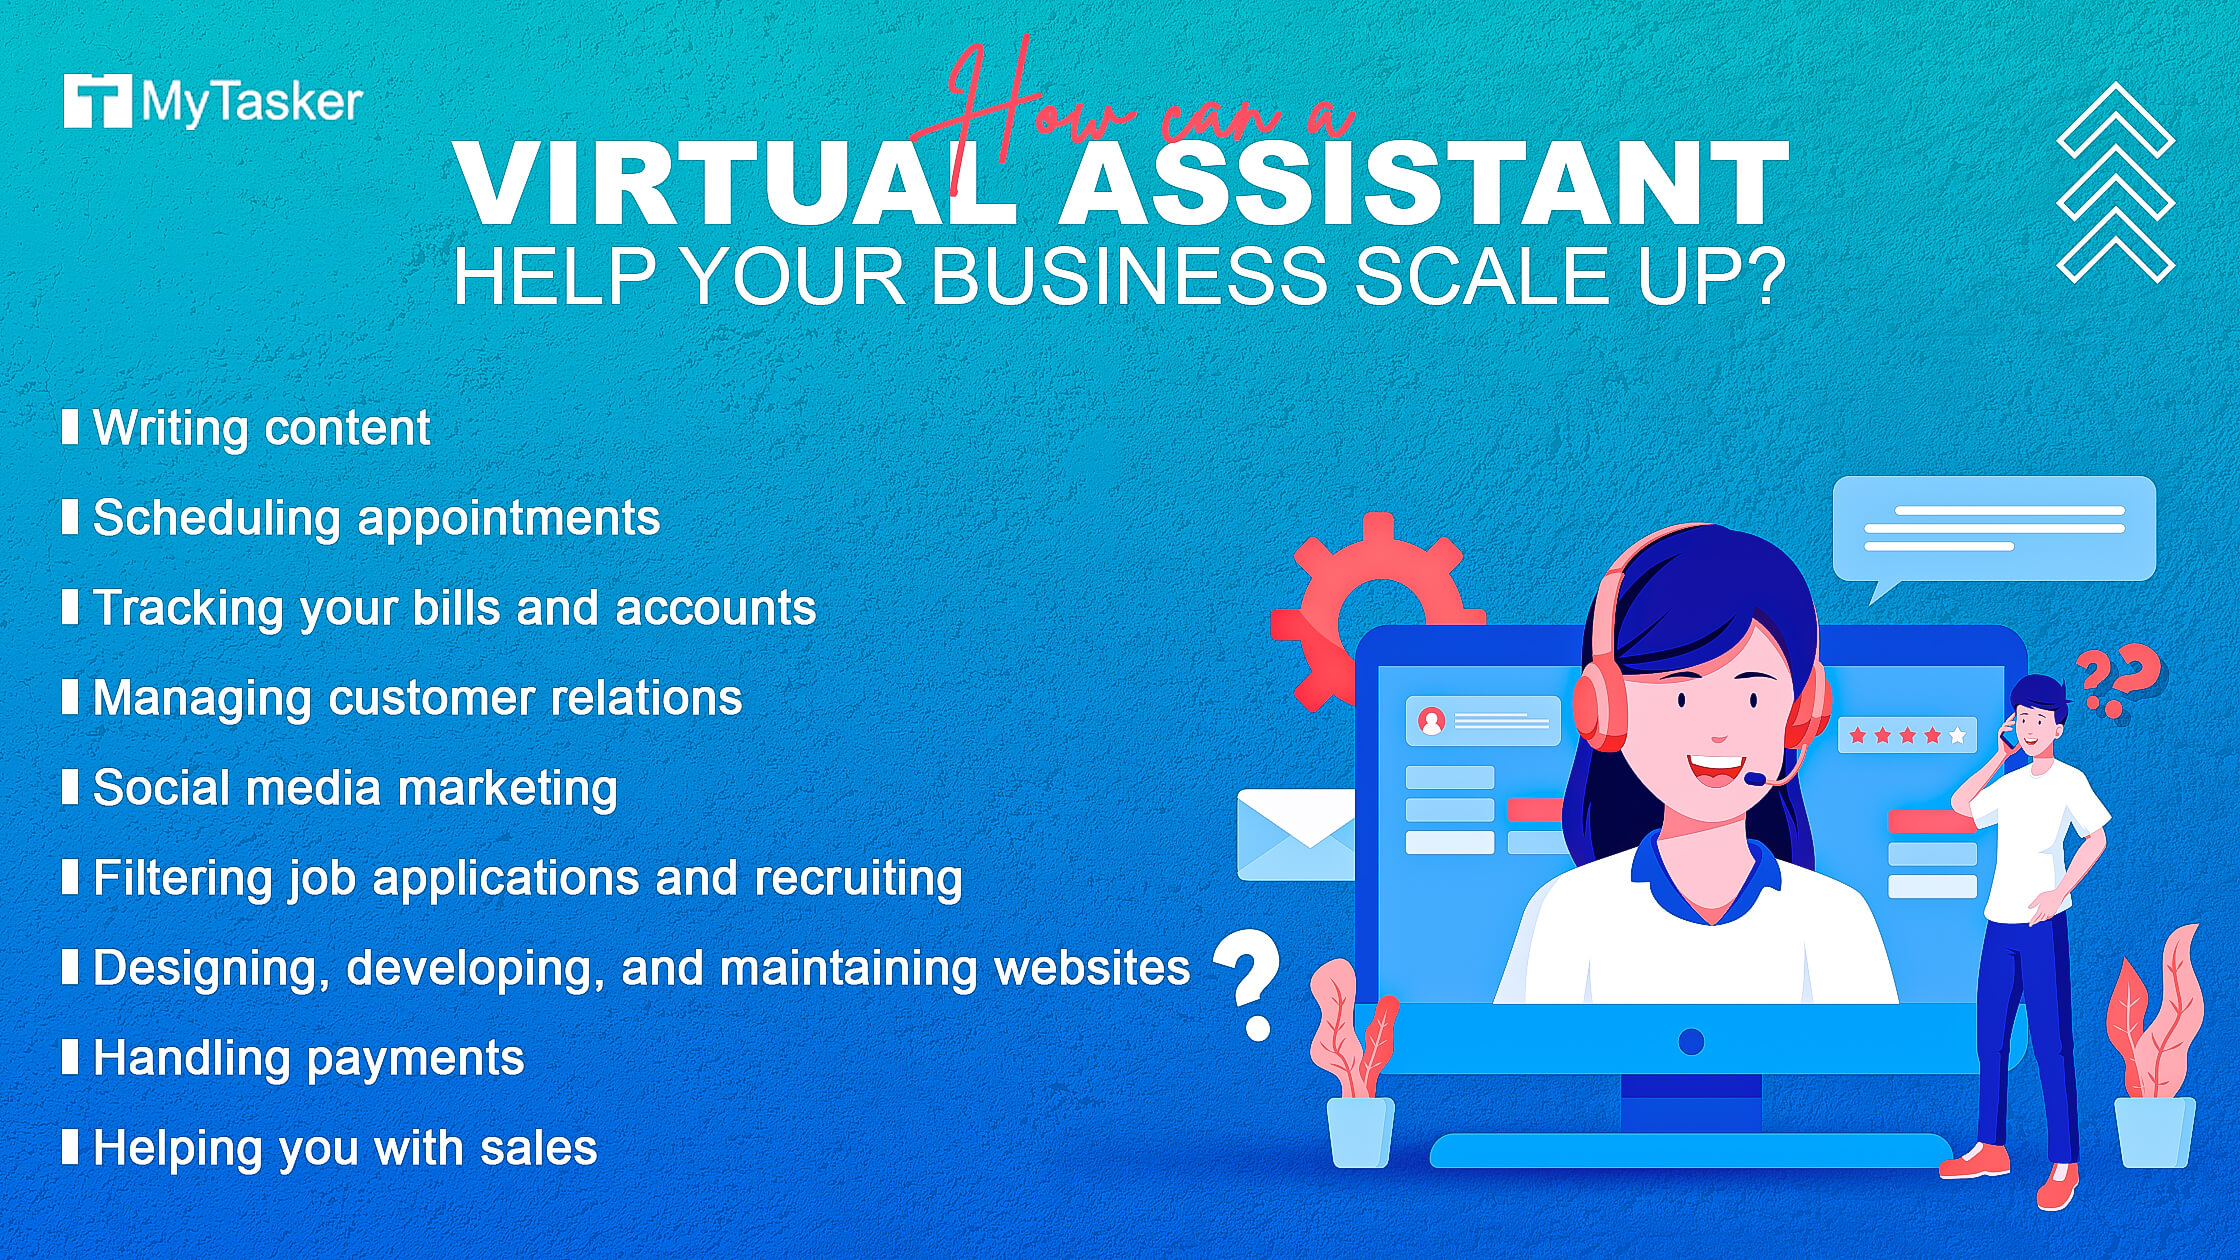 How Can a Virtual Assistant Help Your Business Scale Up?